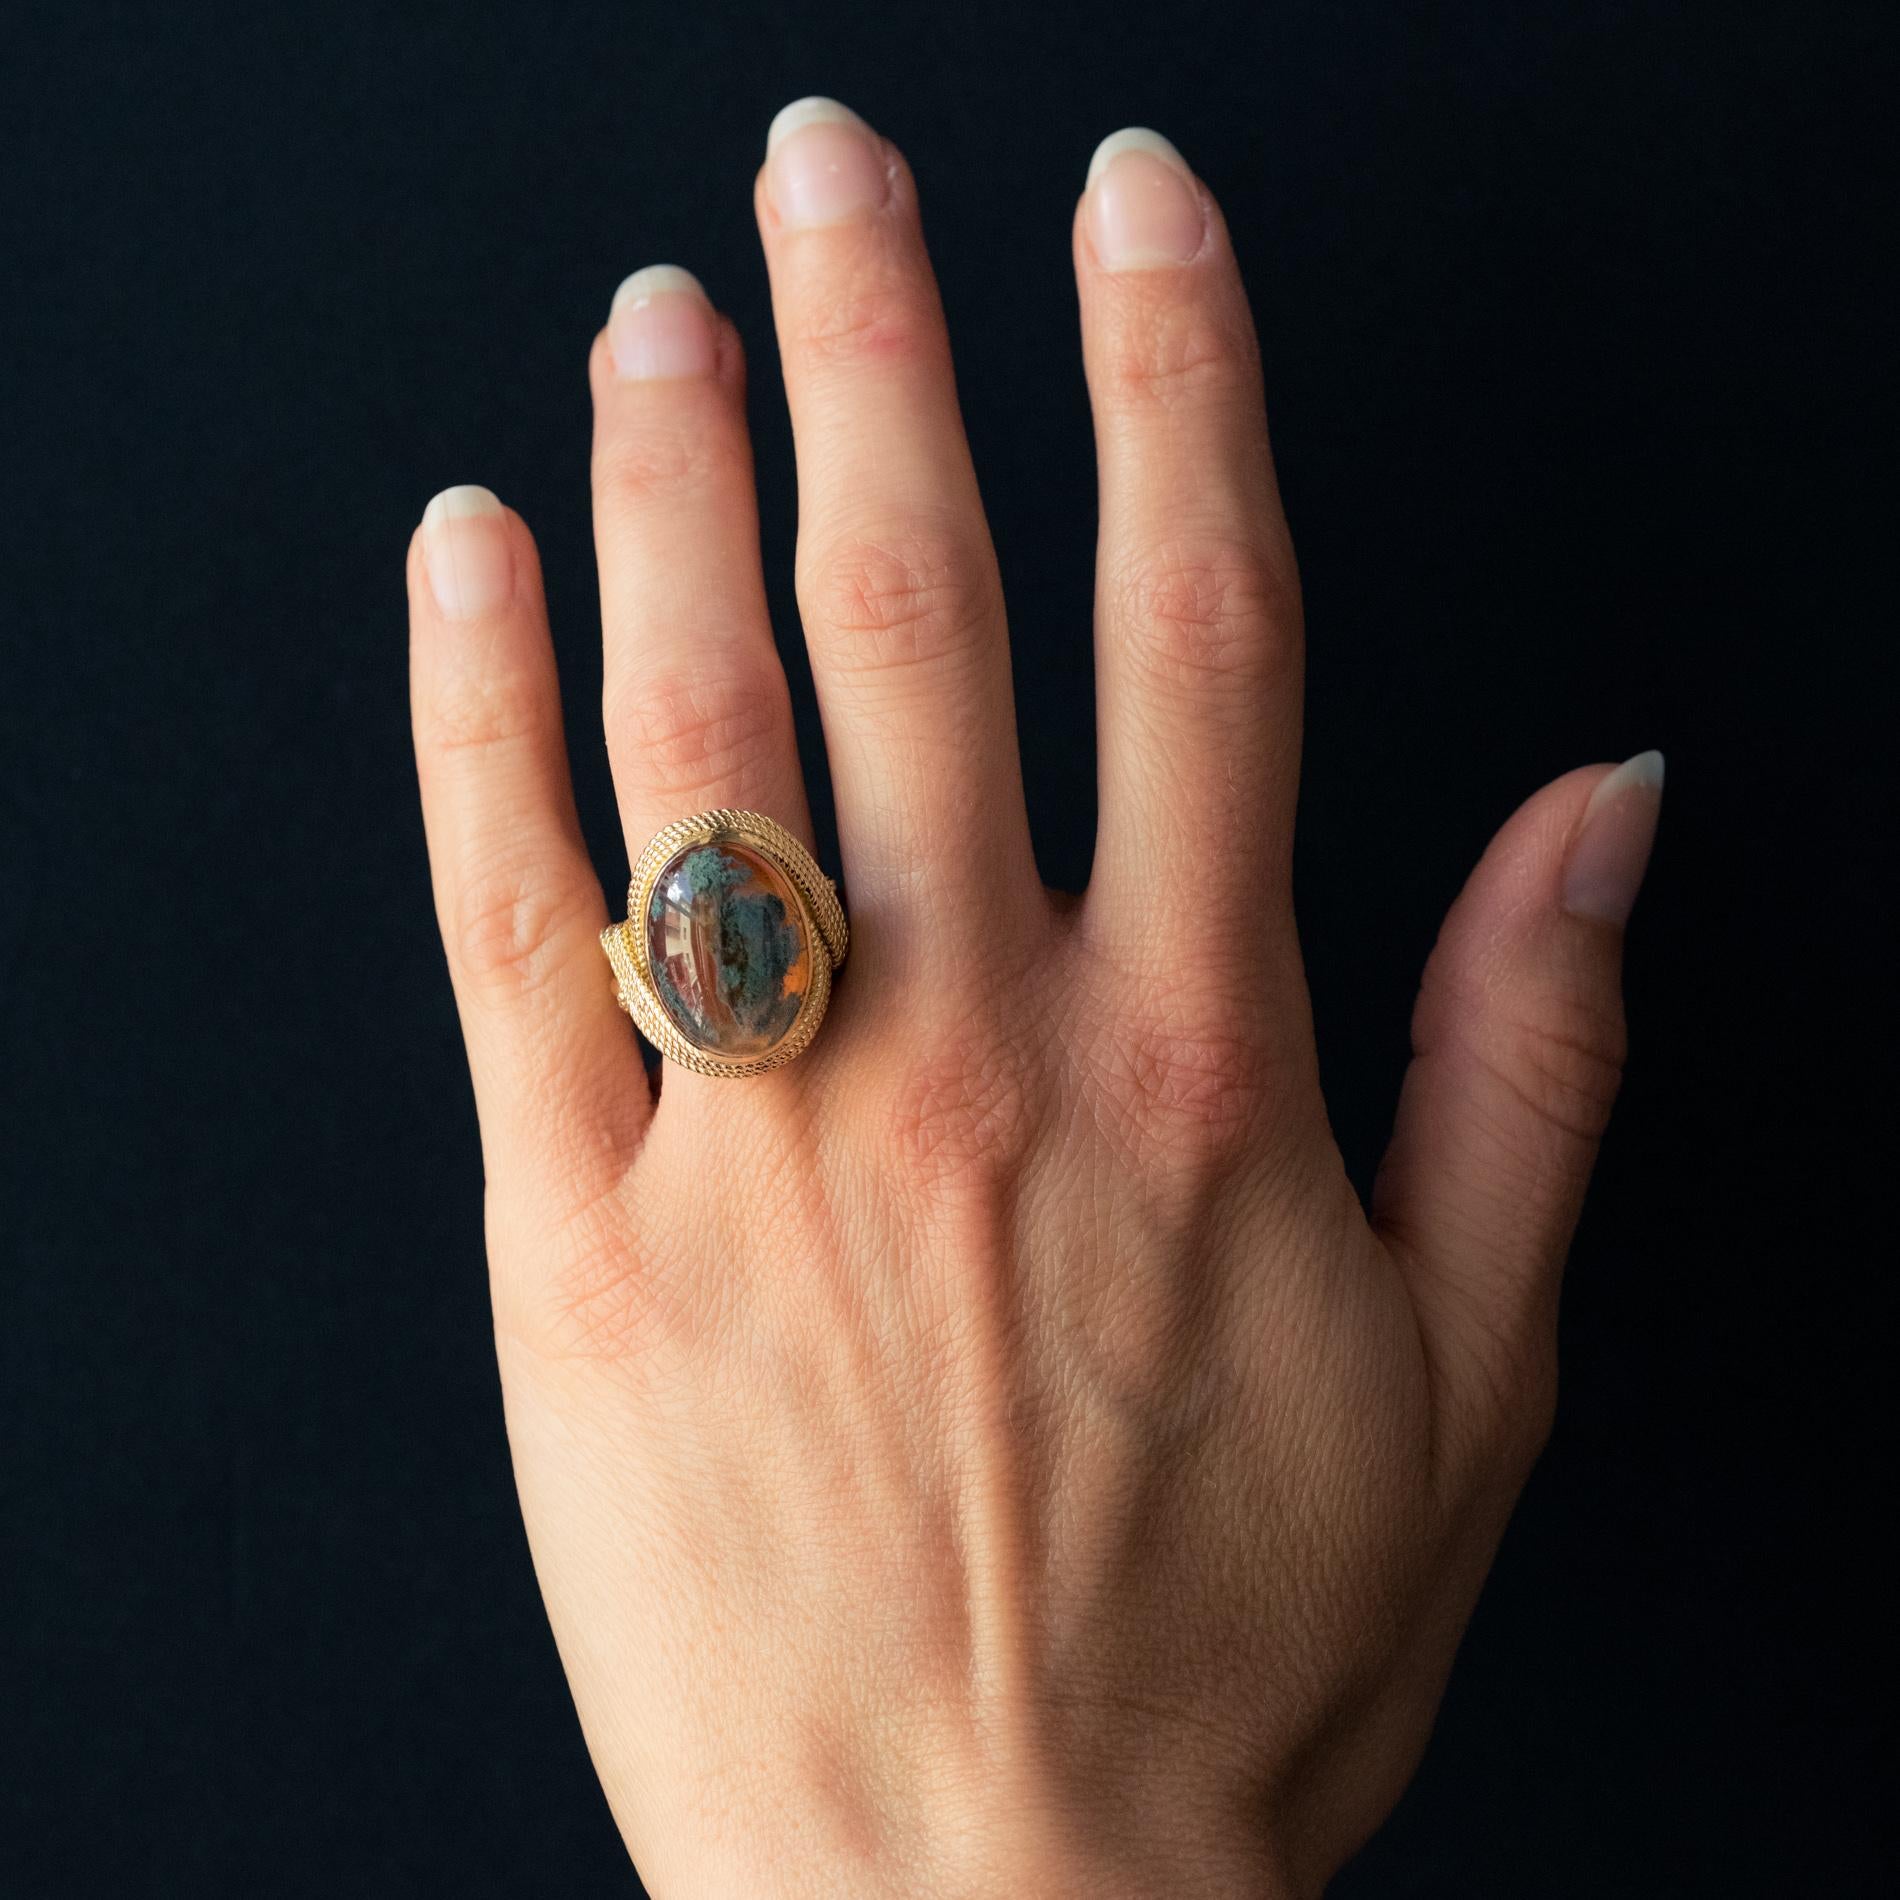 Ring in 18 karat yellow gold, weevil hallmark.
Important retro ring, it is formed by a ribbon composed of three twisted gold threads which hold on top and in closed setting, an orange moss agate. The entire basket also consists of twisted gold